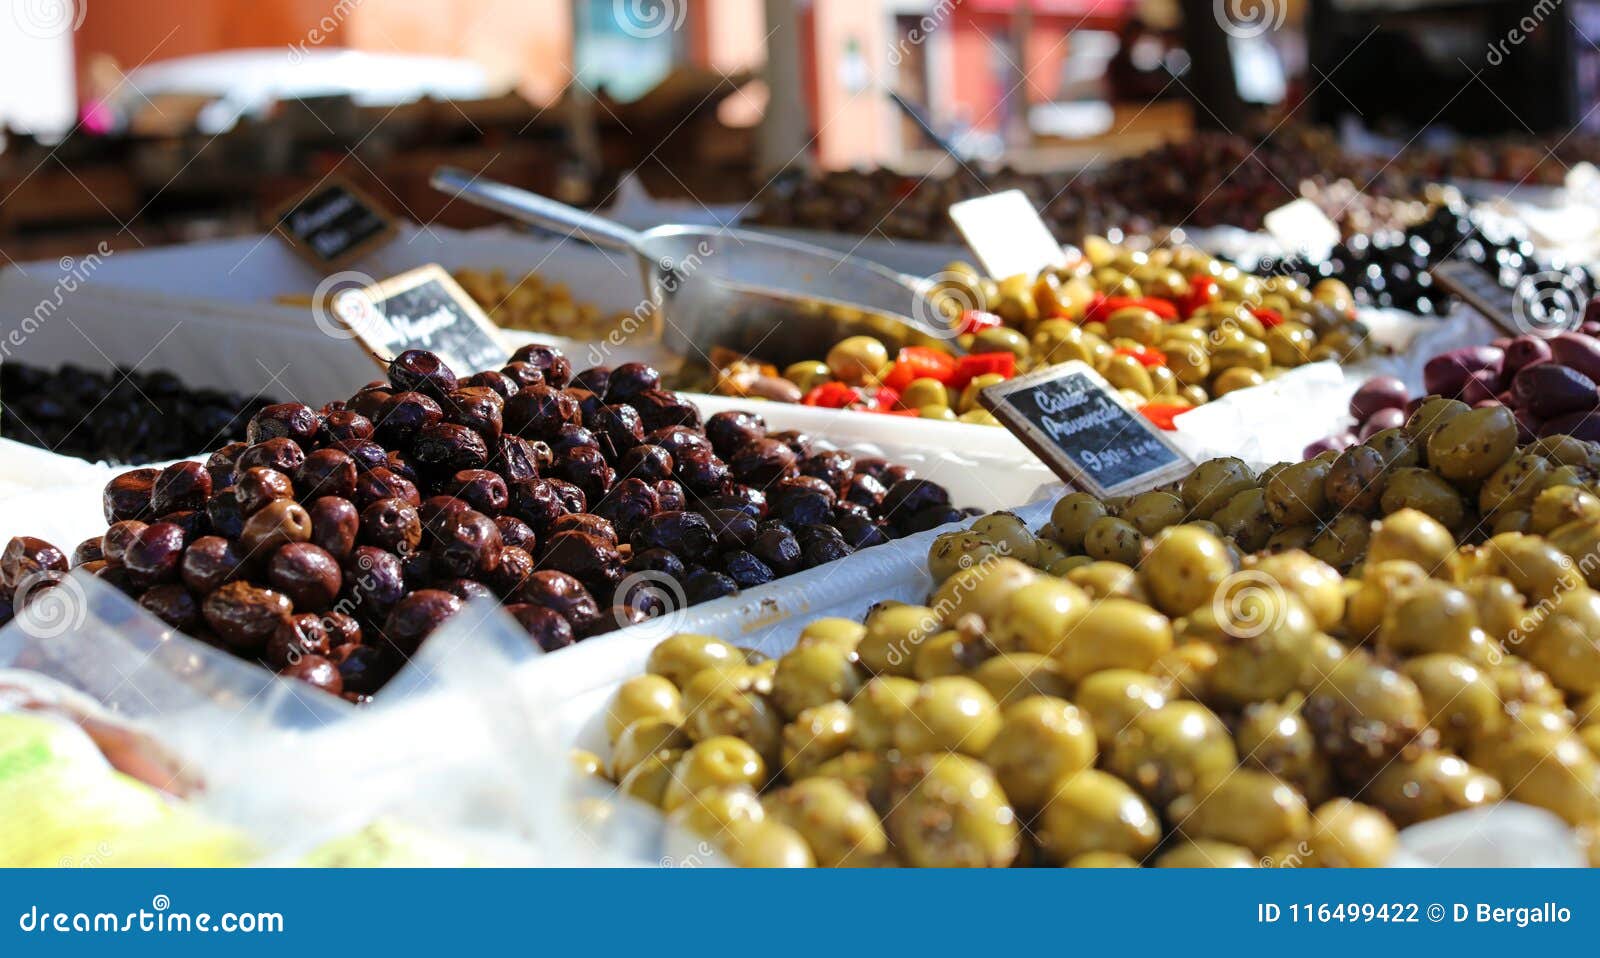 Olives At Street Food Market In Ortigia, Siracuse In Sicily Royalty ...